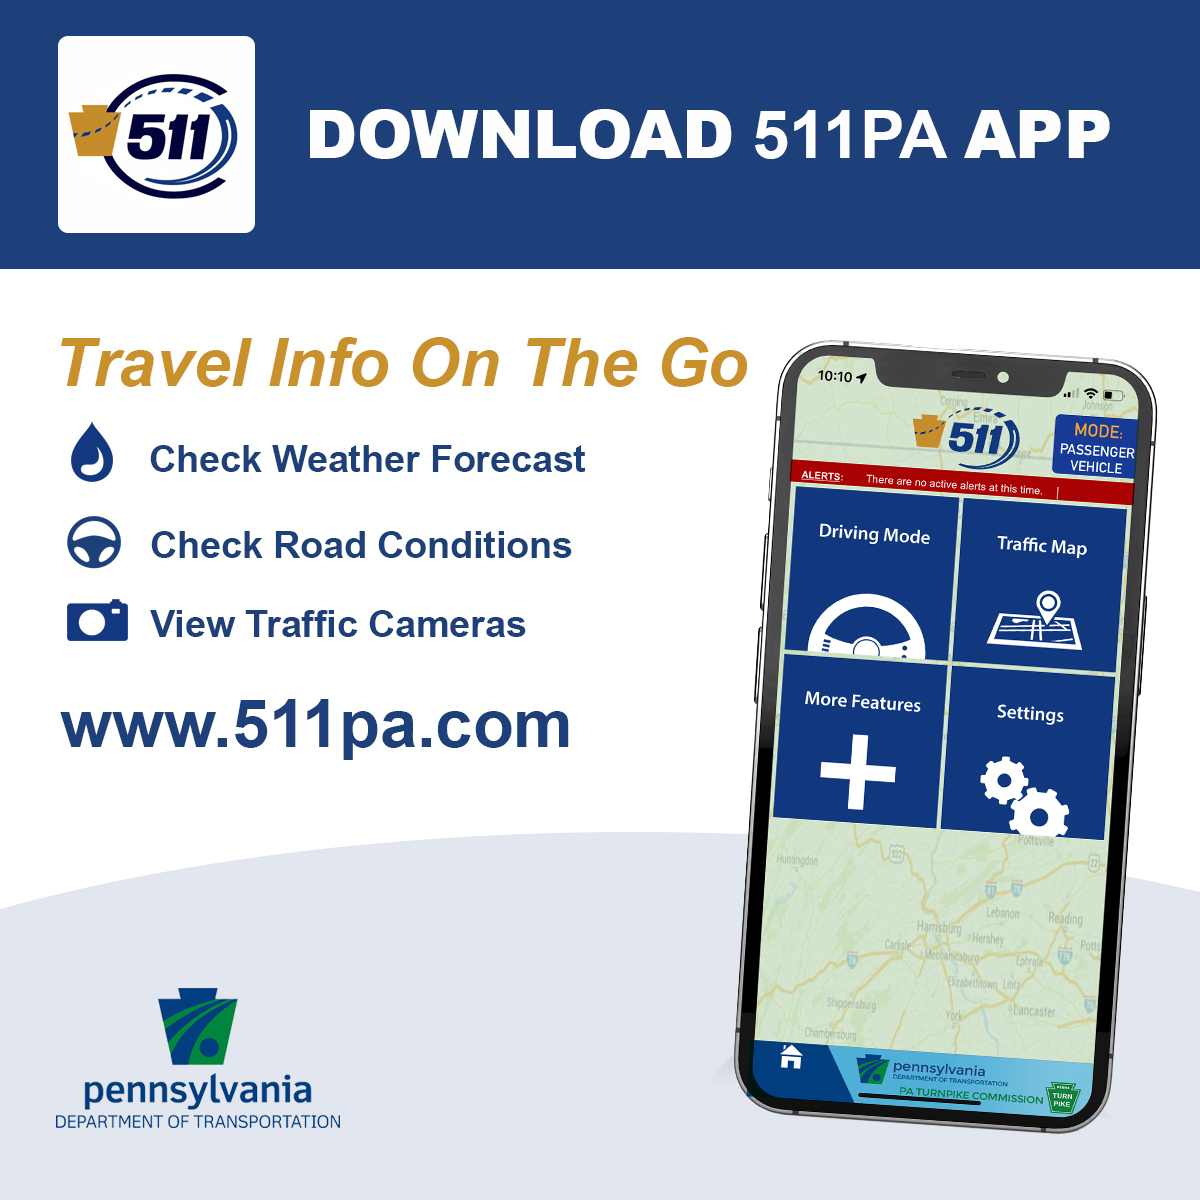 An image showing the 511PA app on a mobile device with language to let users know what is available on the app and to encourage users to download it 